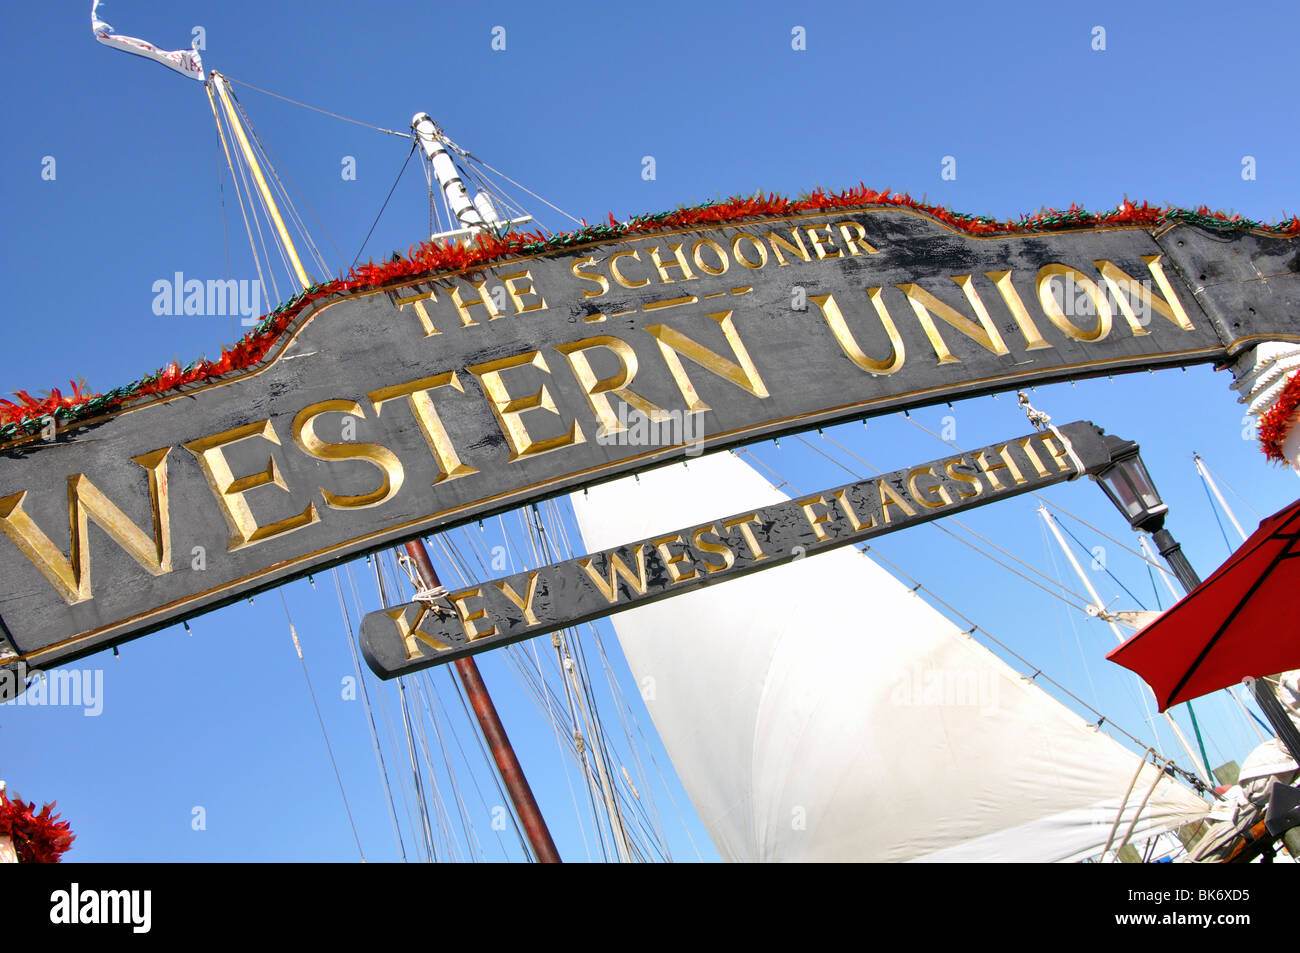 FLORIDA'S FLAGSHIP FALTERS: GROUP STRUGGLES TO SAVE SCHOONER WESTERN UNION